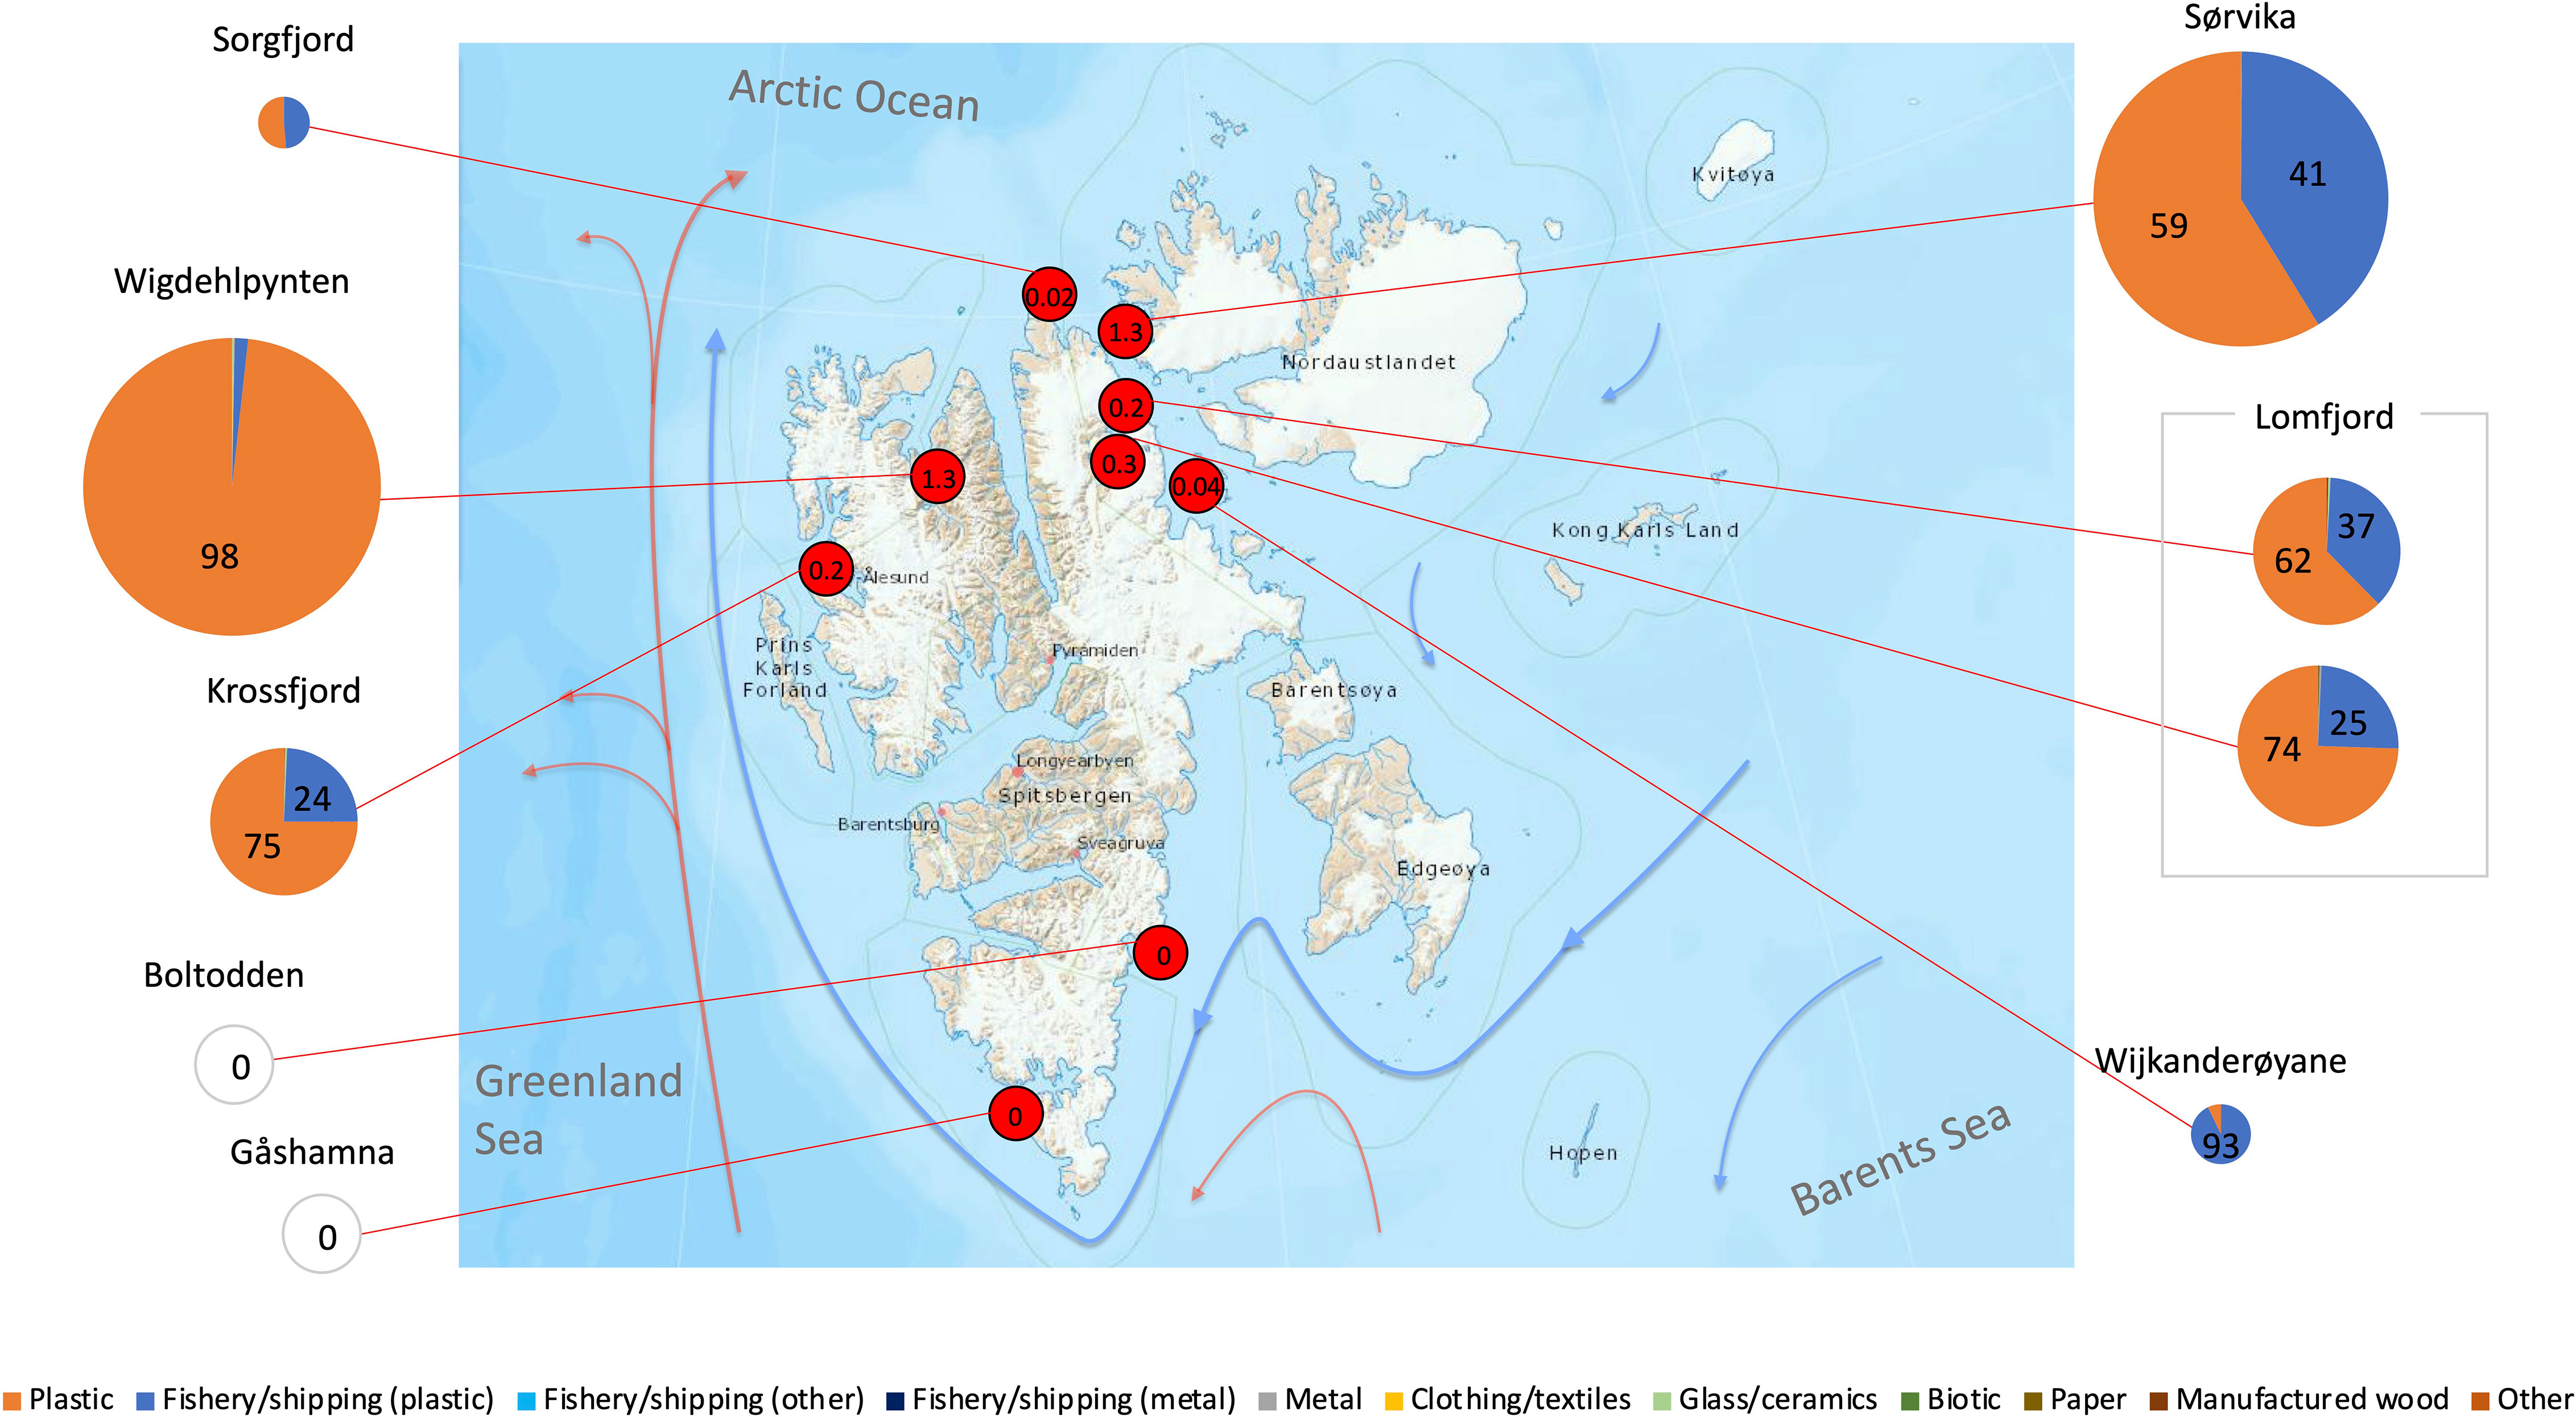 Whose Fish? Looking at Svalbard's Fisheries Protection Zone